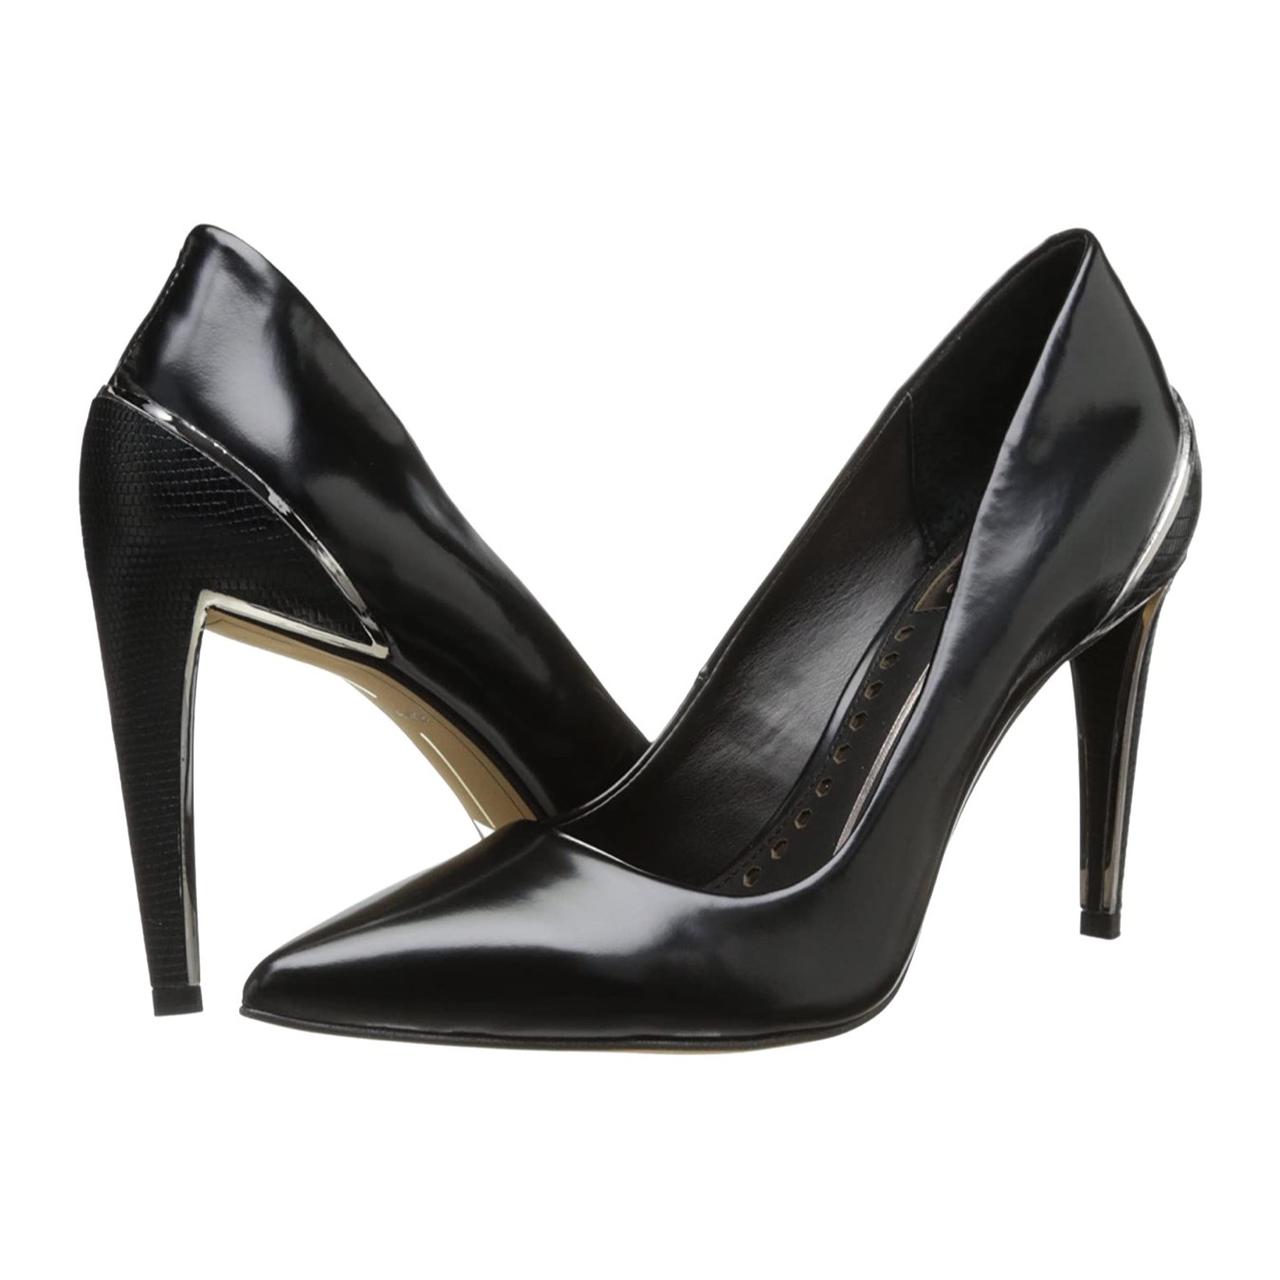 Dolce Vita Women's Black and Silver Courts